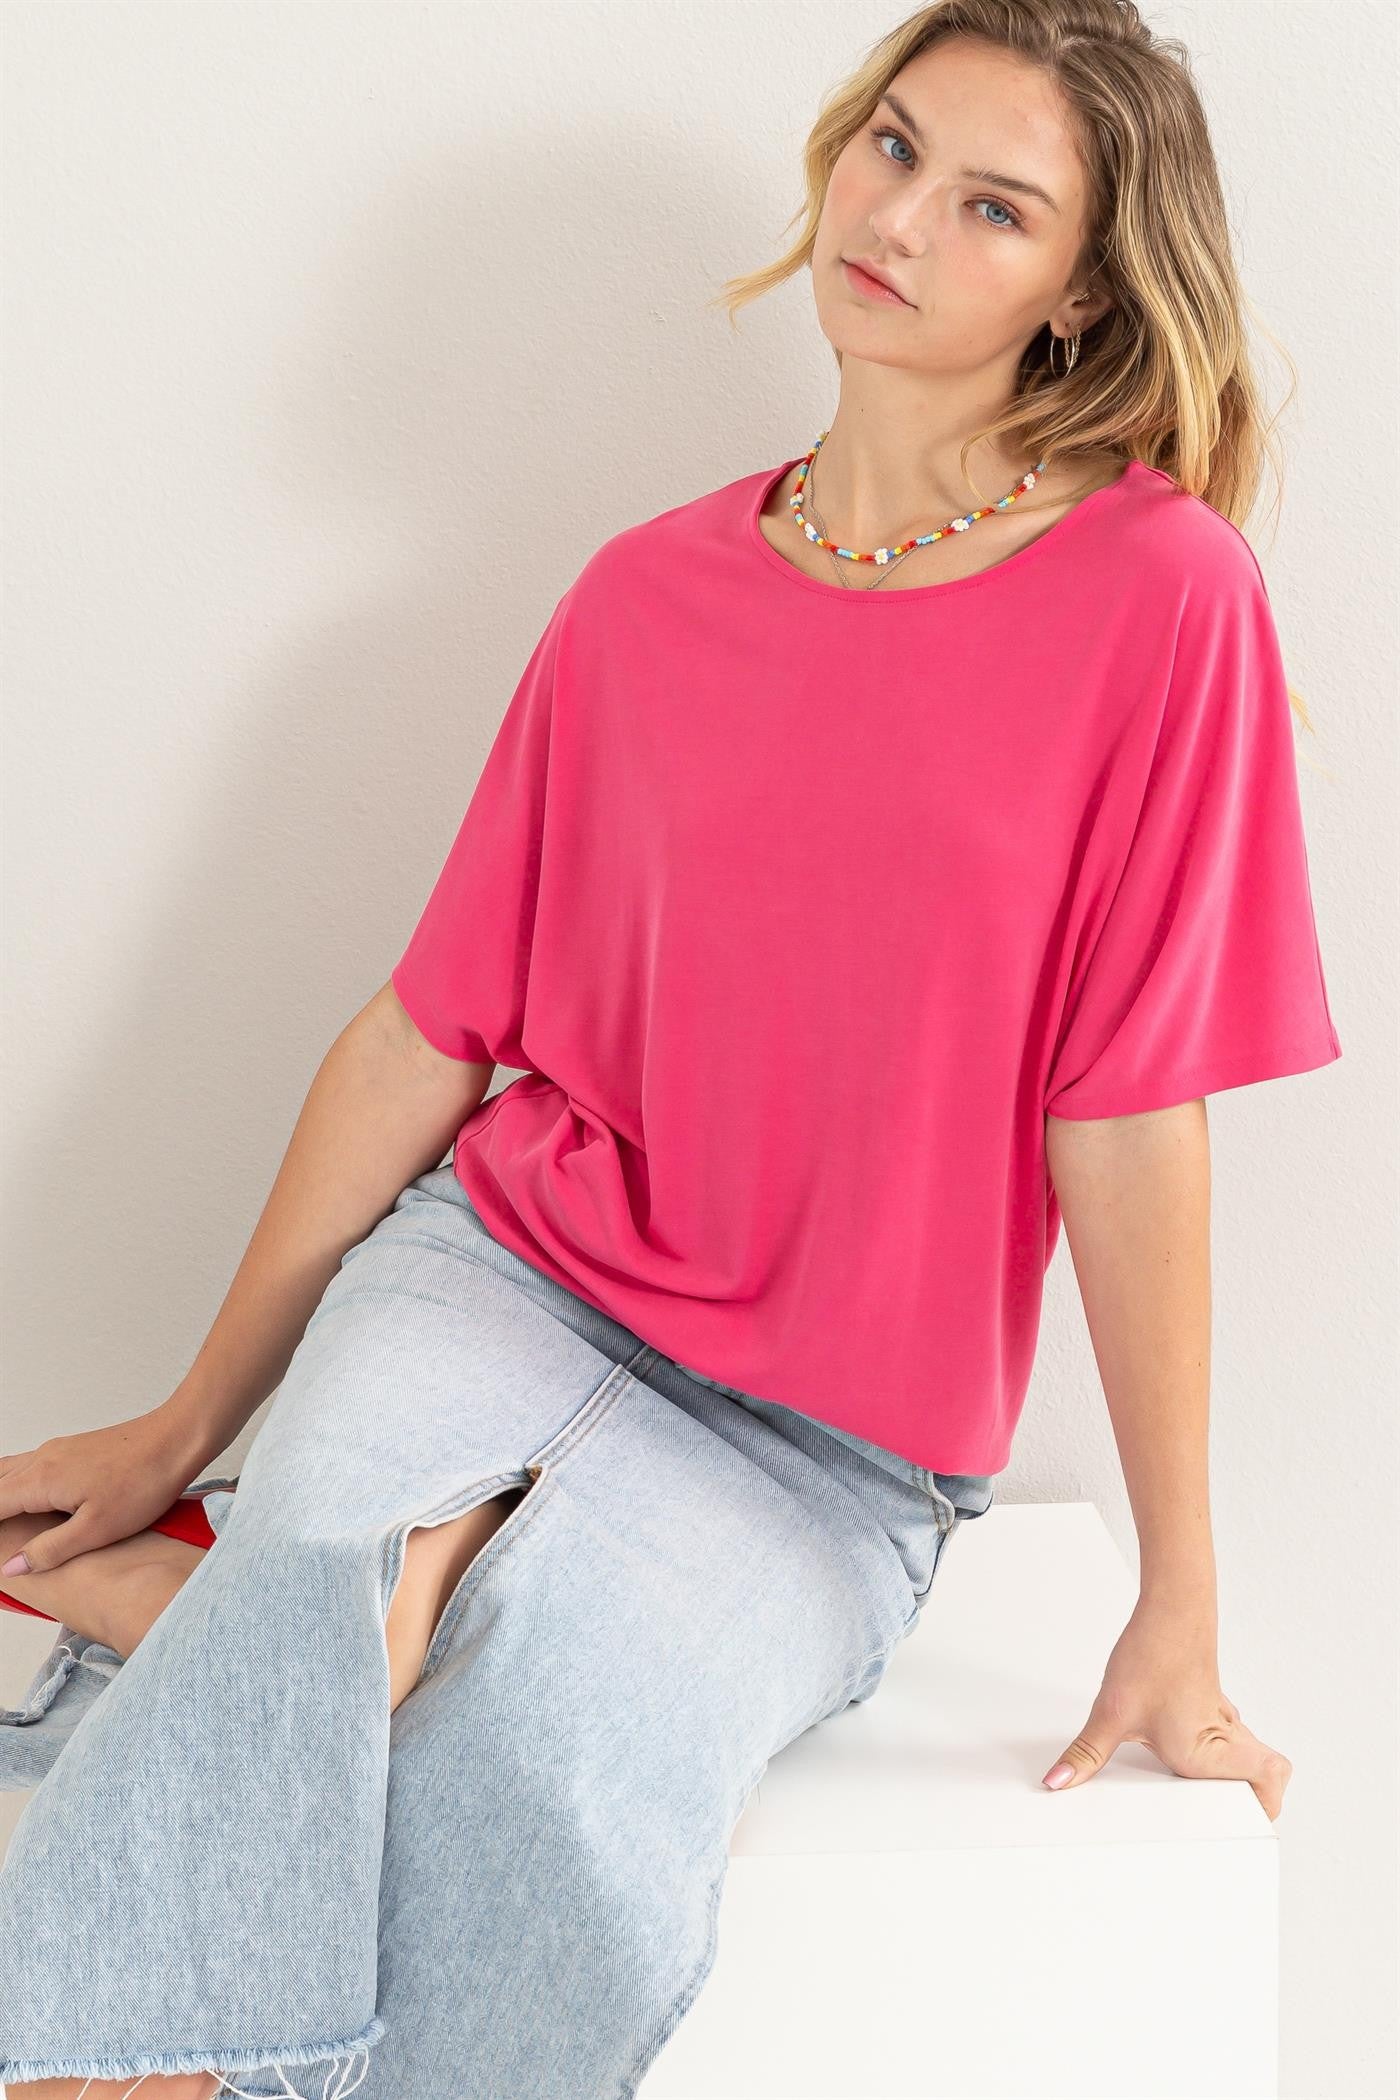 Knit Top with Short Dolman Sleeves